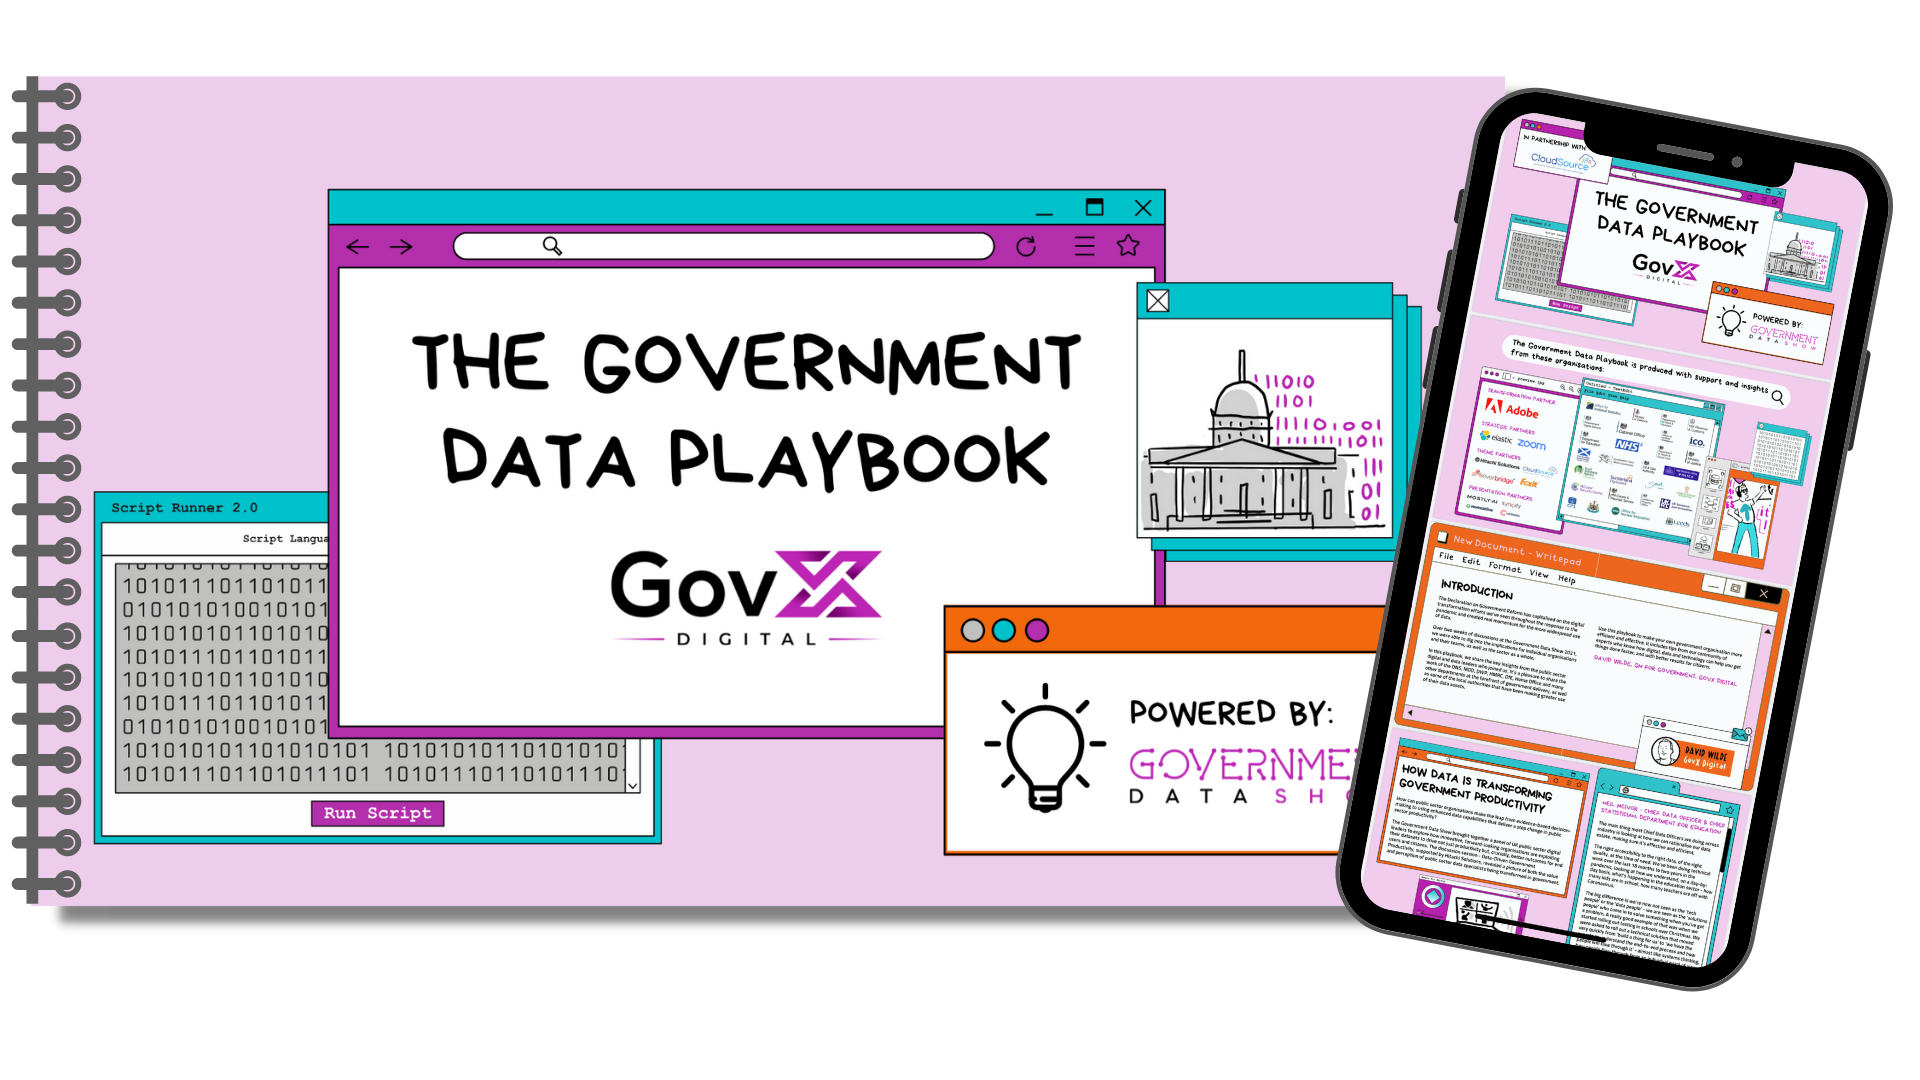 The Government Data Playbook